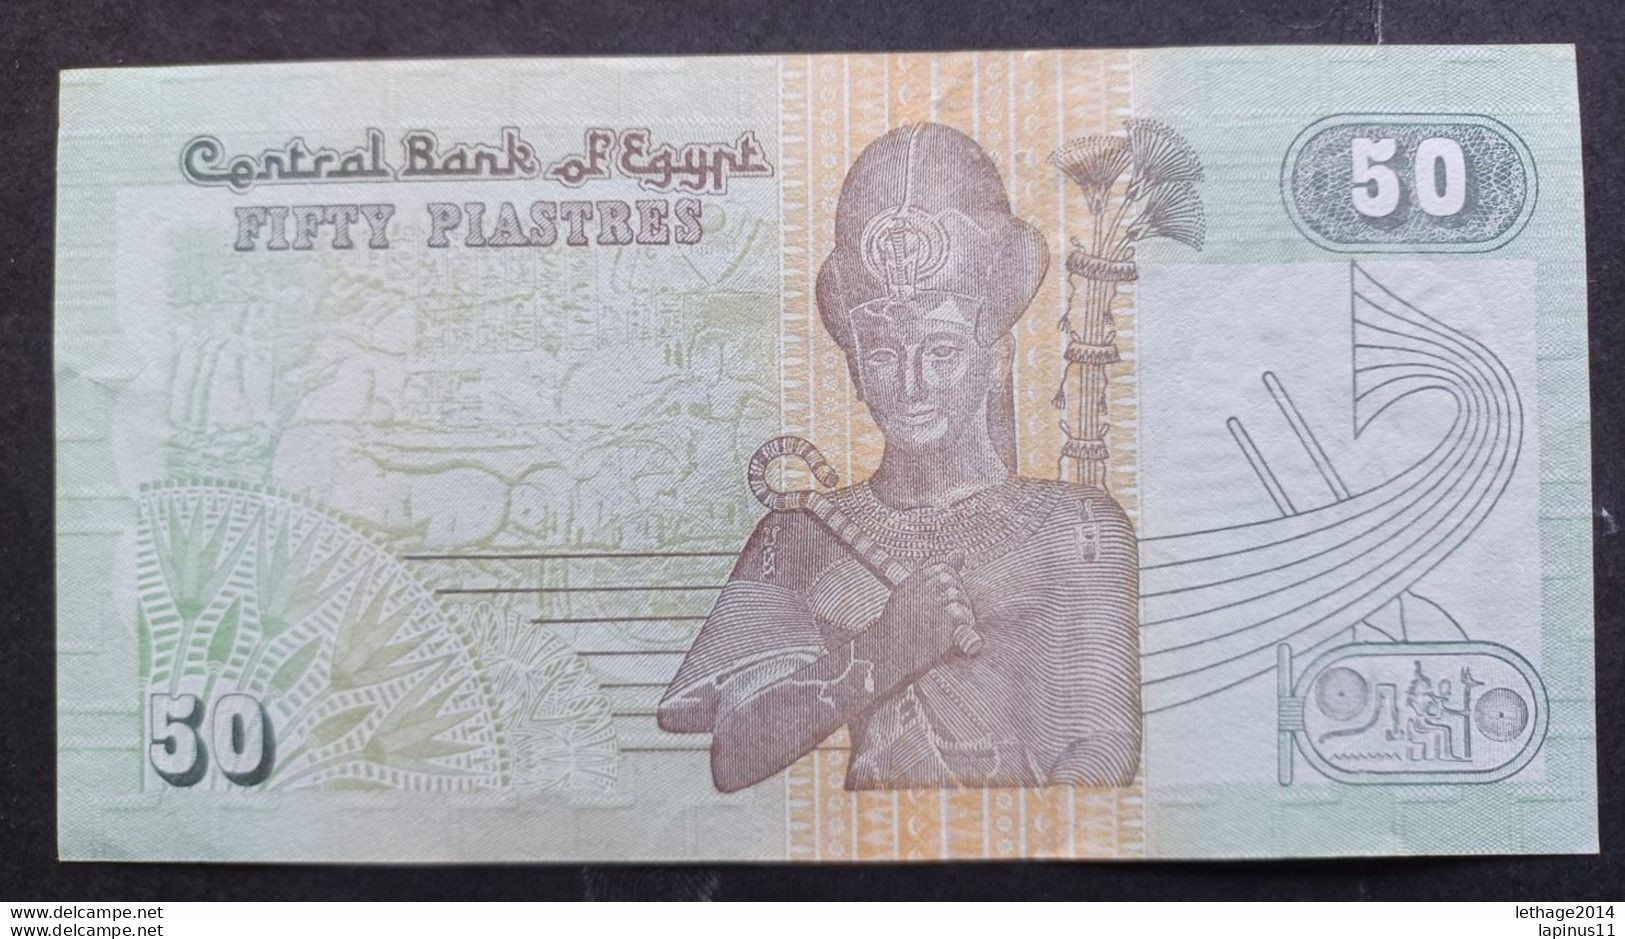 BANKNOTE EGYPT EGYPT 50 PIASTRES 1992 UNCIRCULATED SUPERB - Egypt